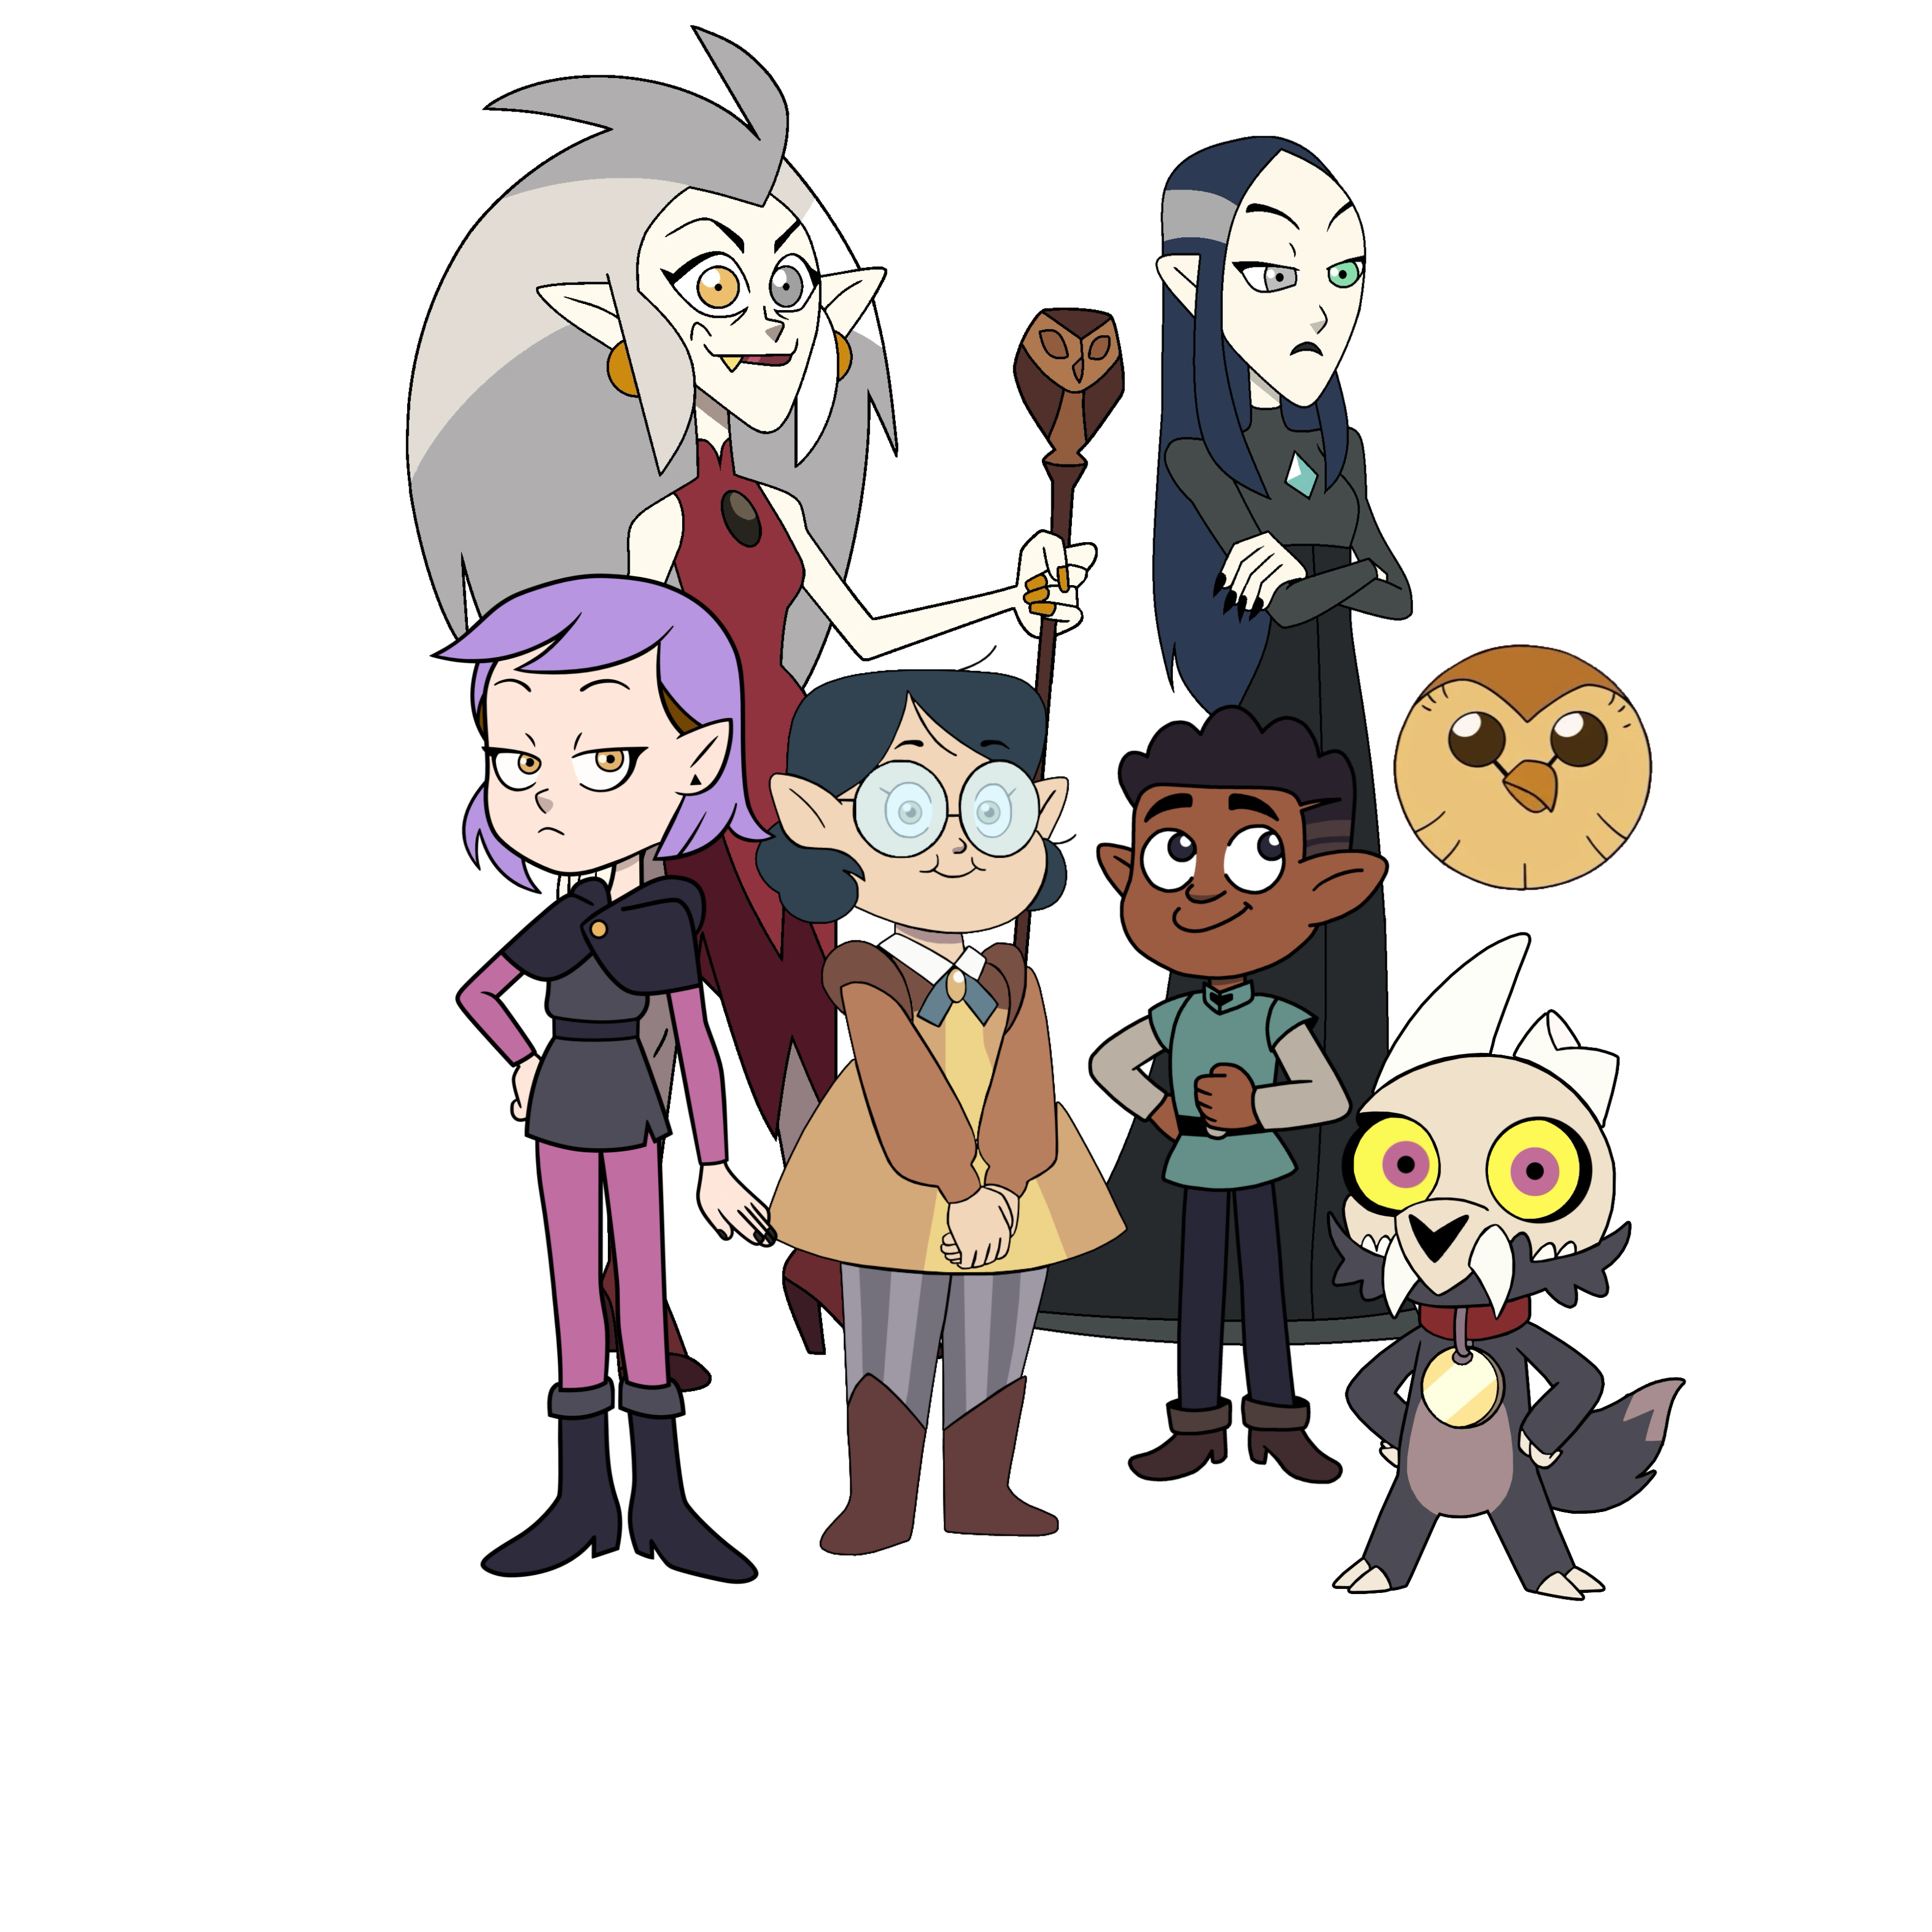 The Owl House Side Characters by MatthewsRENDERS4477 on DeviantArt